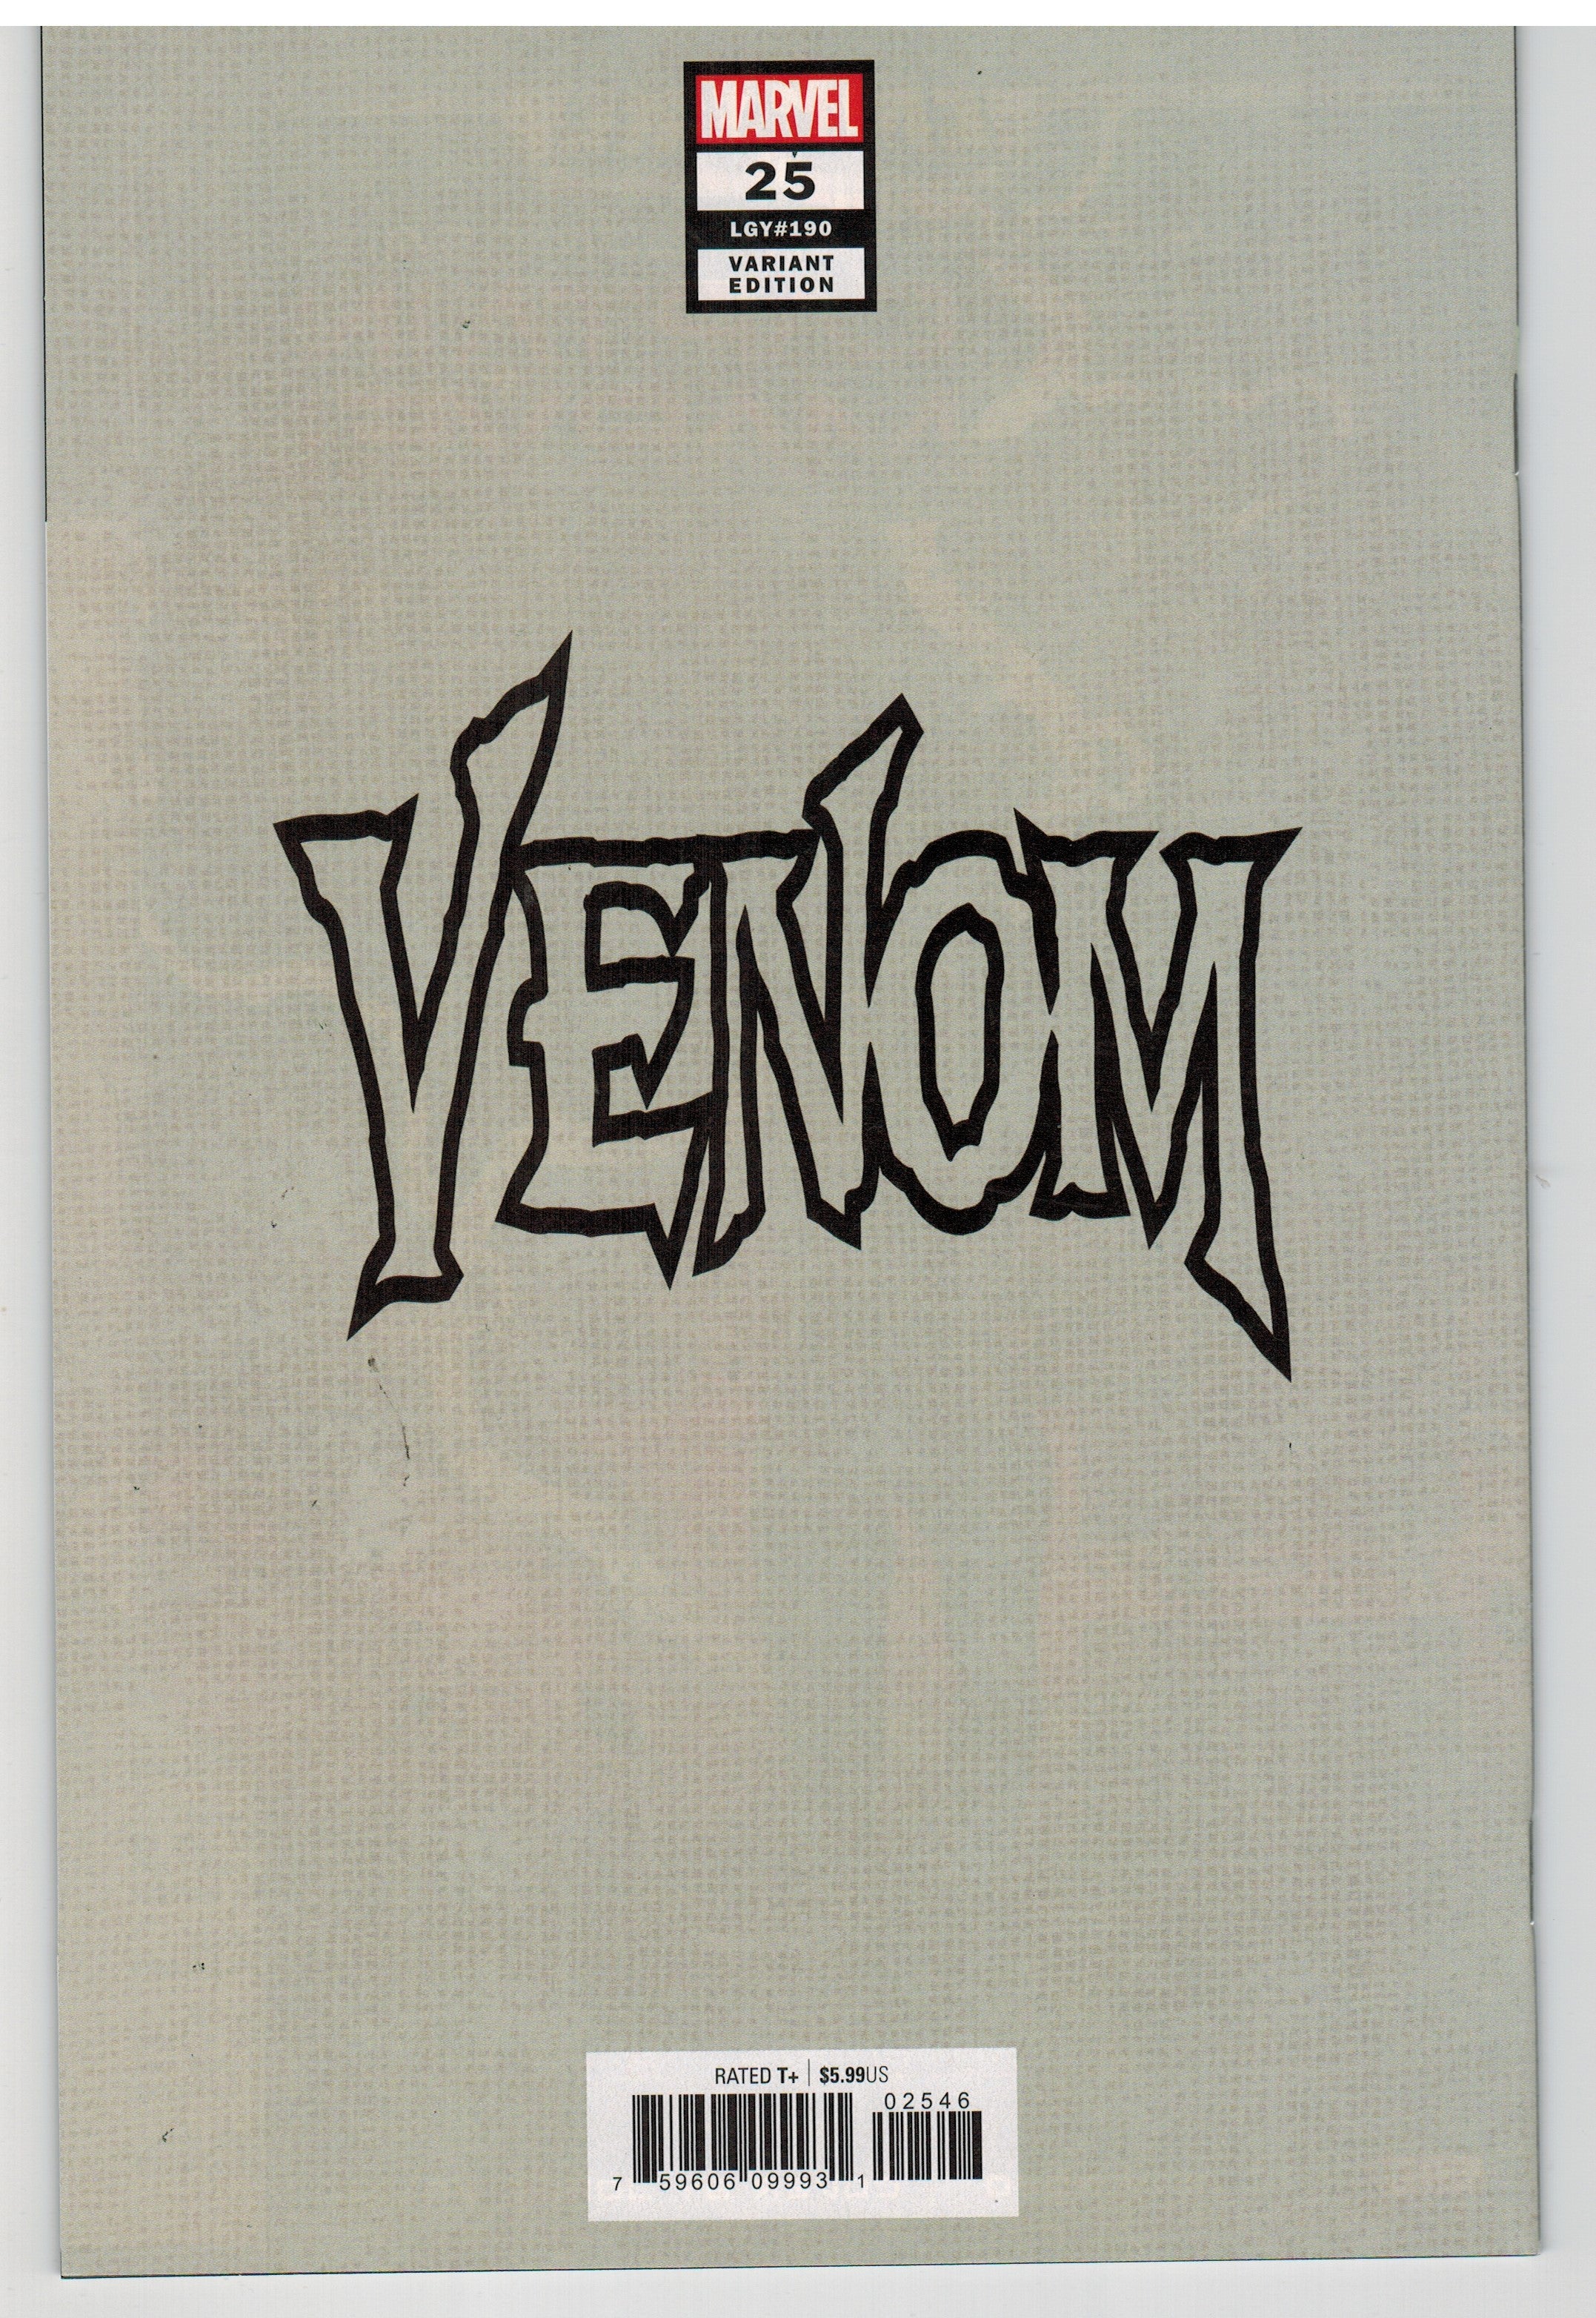 Photo of Venom, Vol. 4 (2020) Issue 25AX - Very Fine/Near Mint Comic sold by Stronghold Collectibles